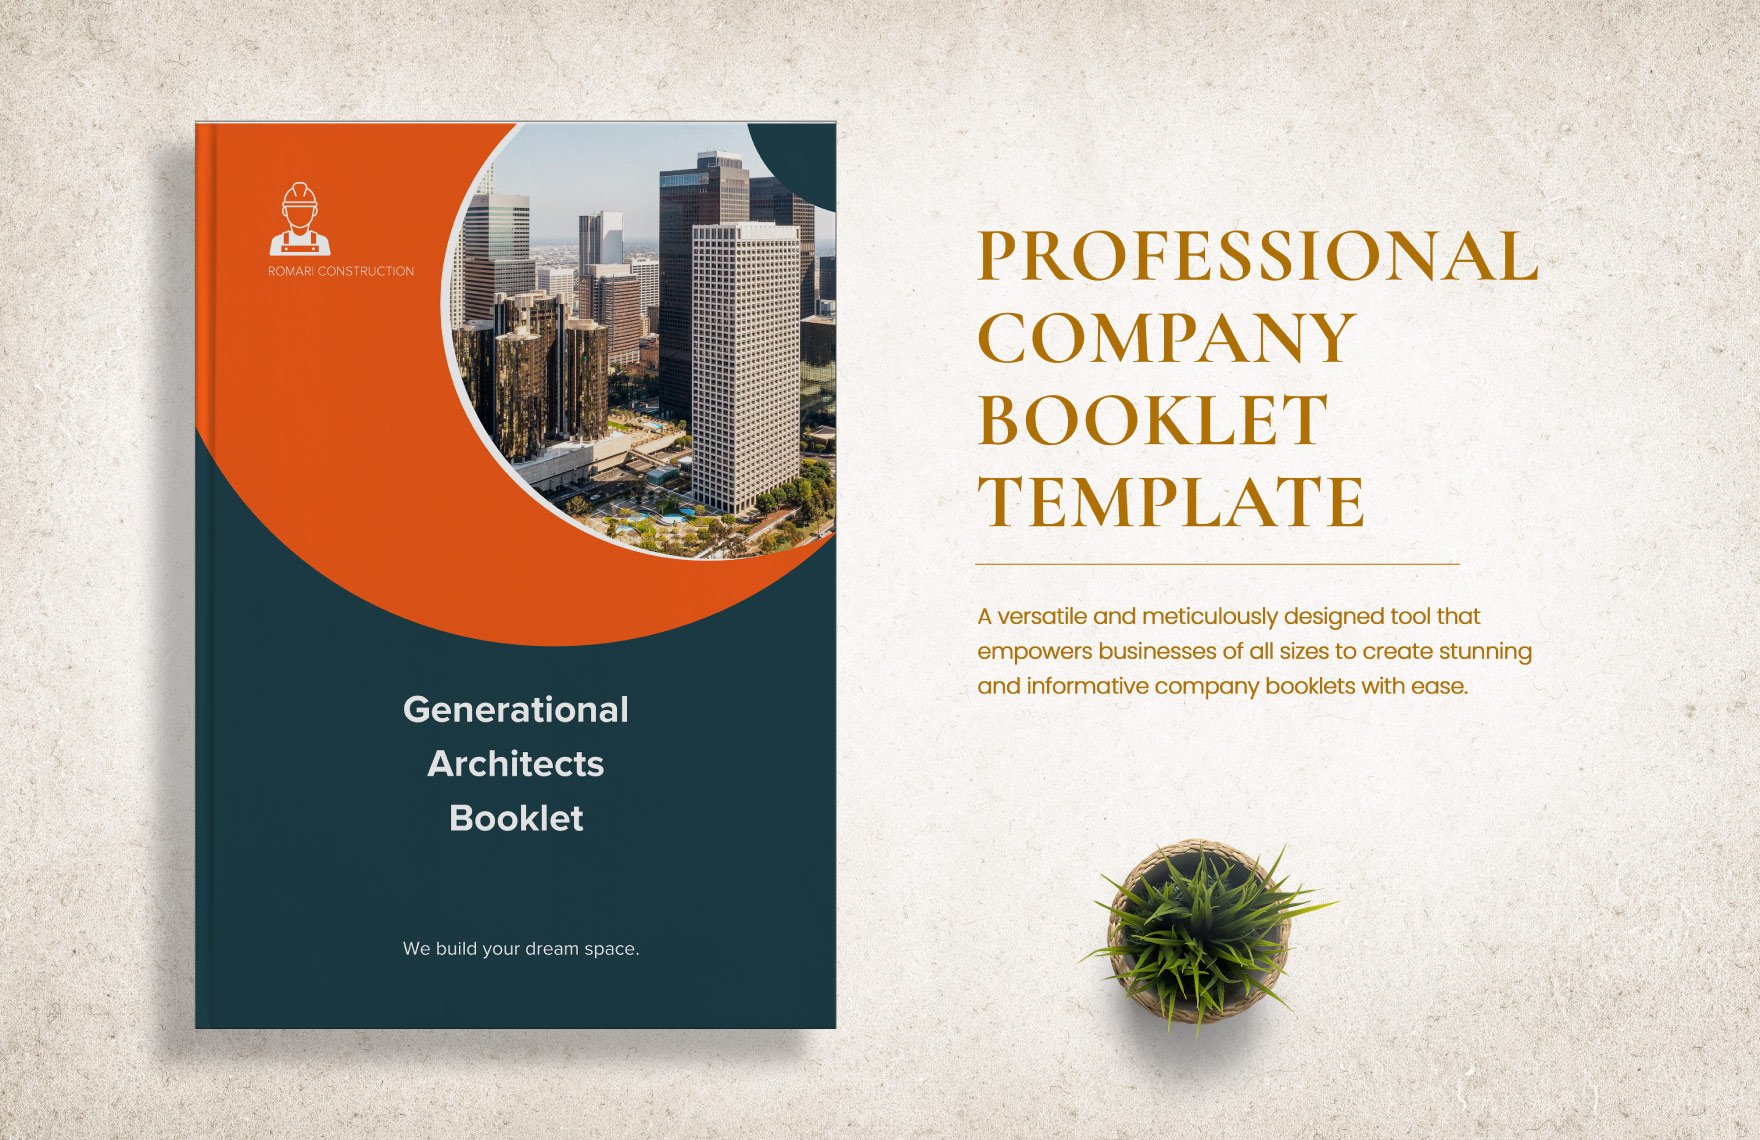 Professional Company Booklet Template in Word, Google Docs, PDF, Illustrator, PSD, Publisher, InDesign